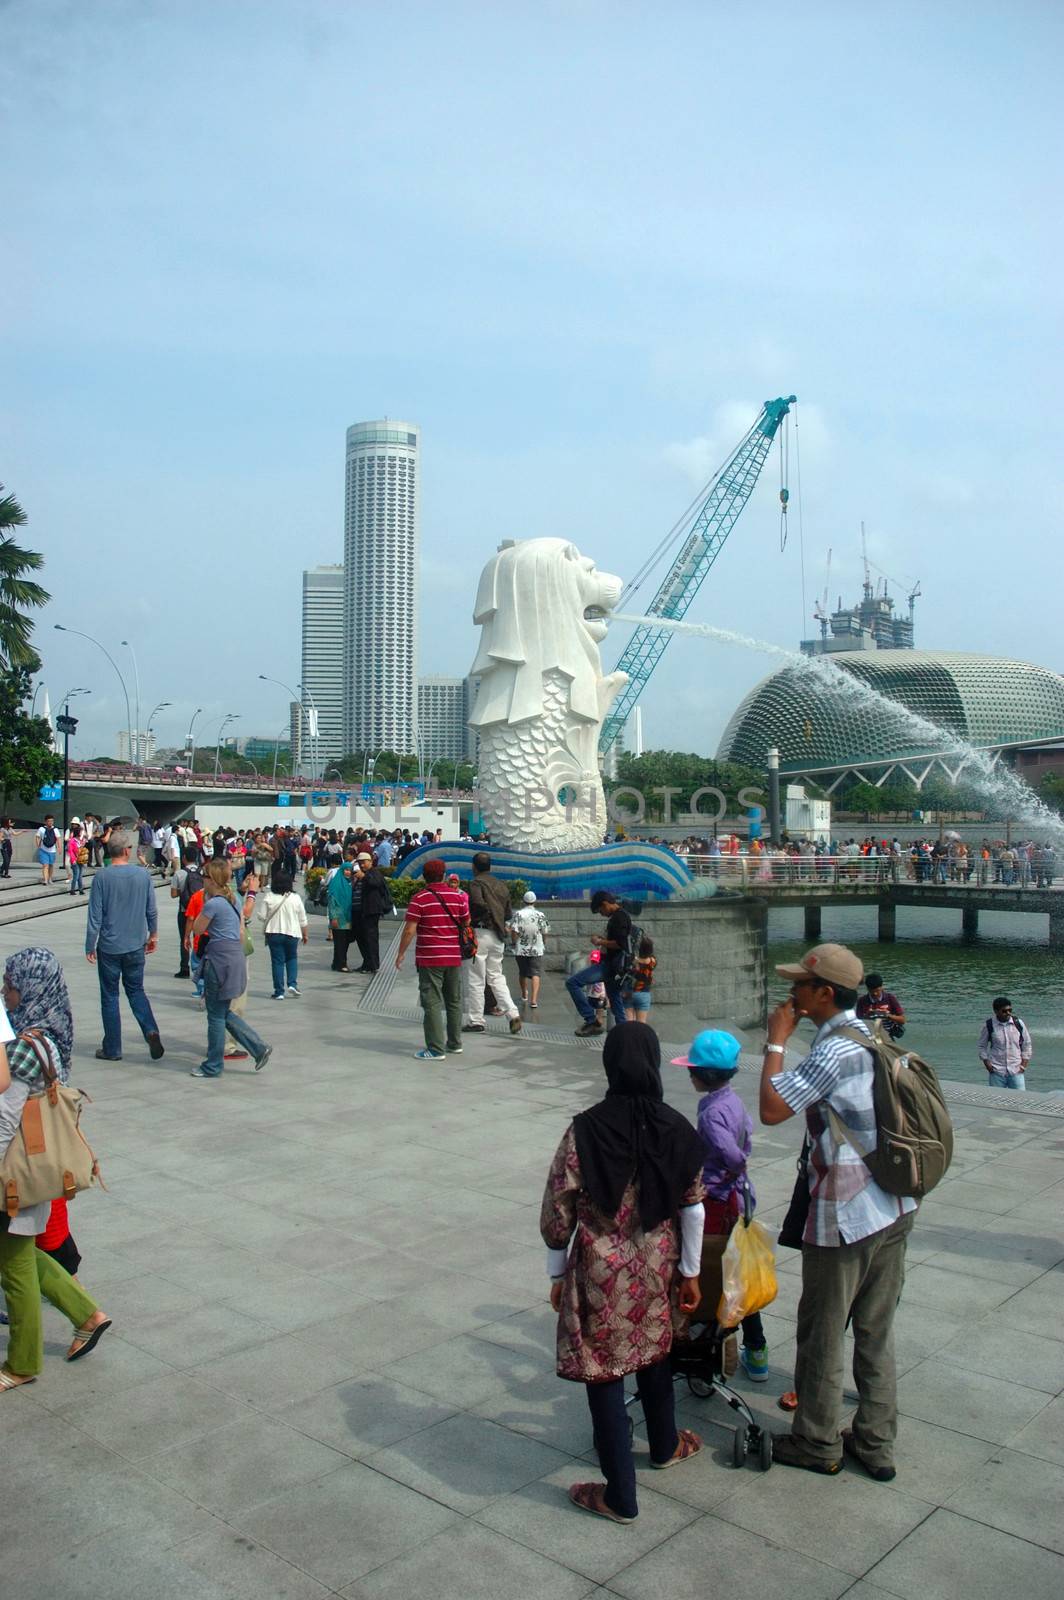 Singapore, Singapore - January 18, 2014: Merlion statue that become iconic of Singapore country.